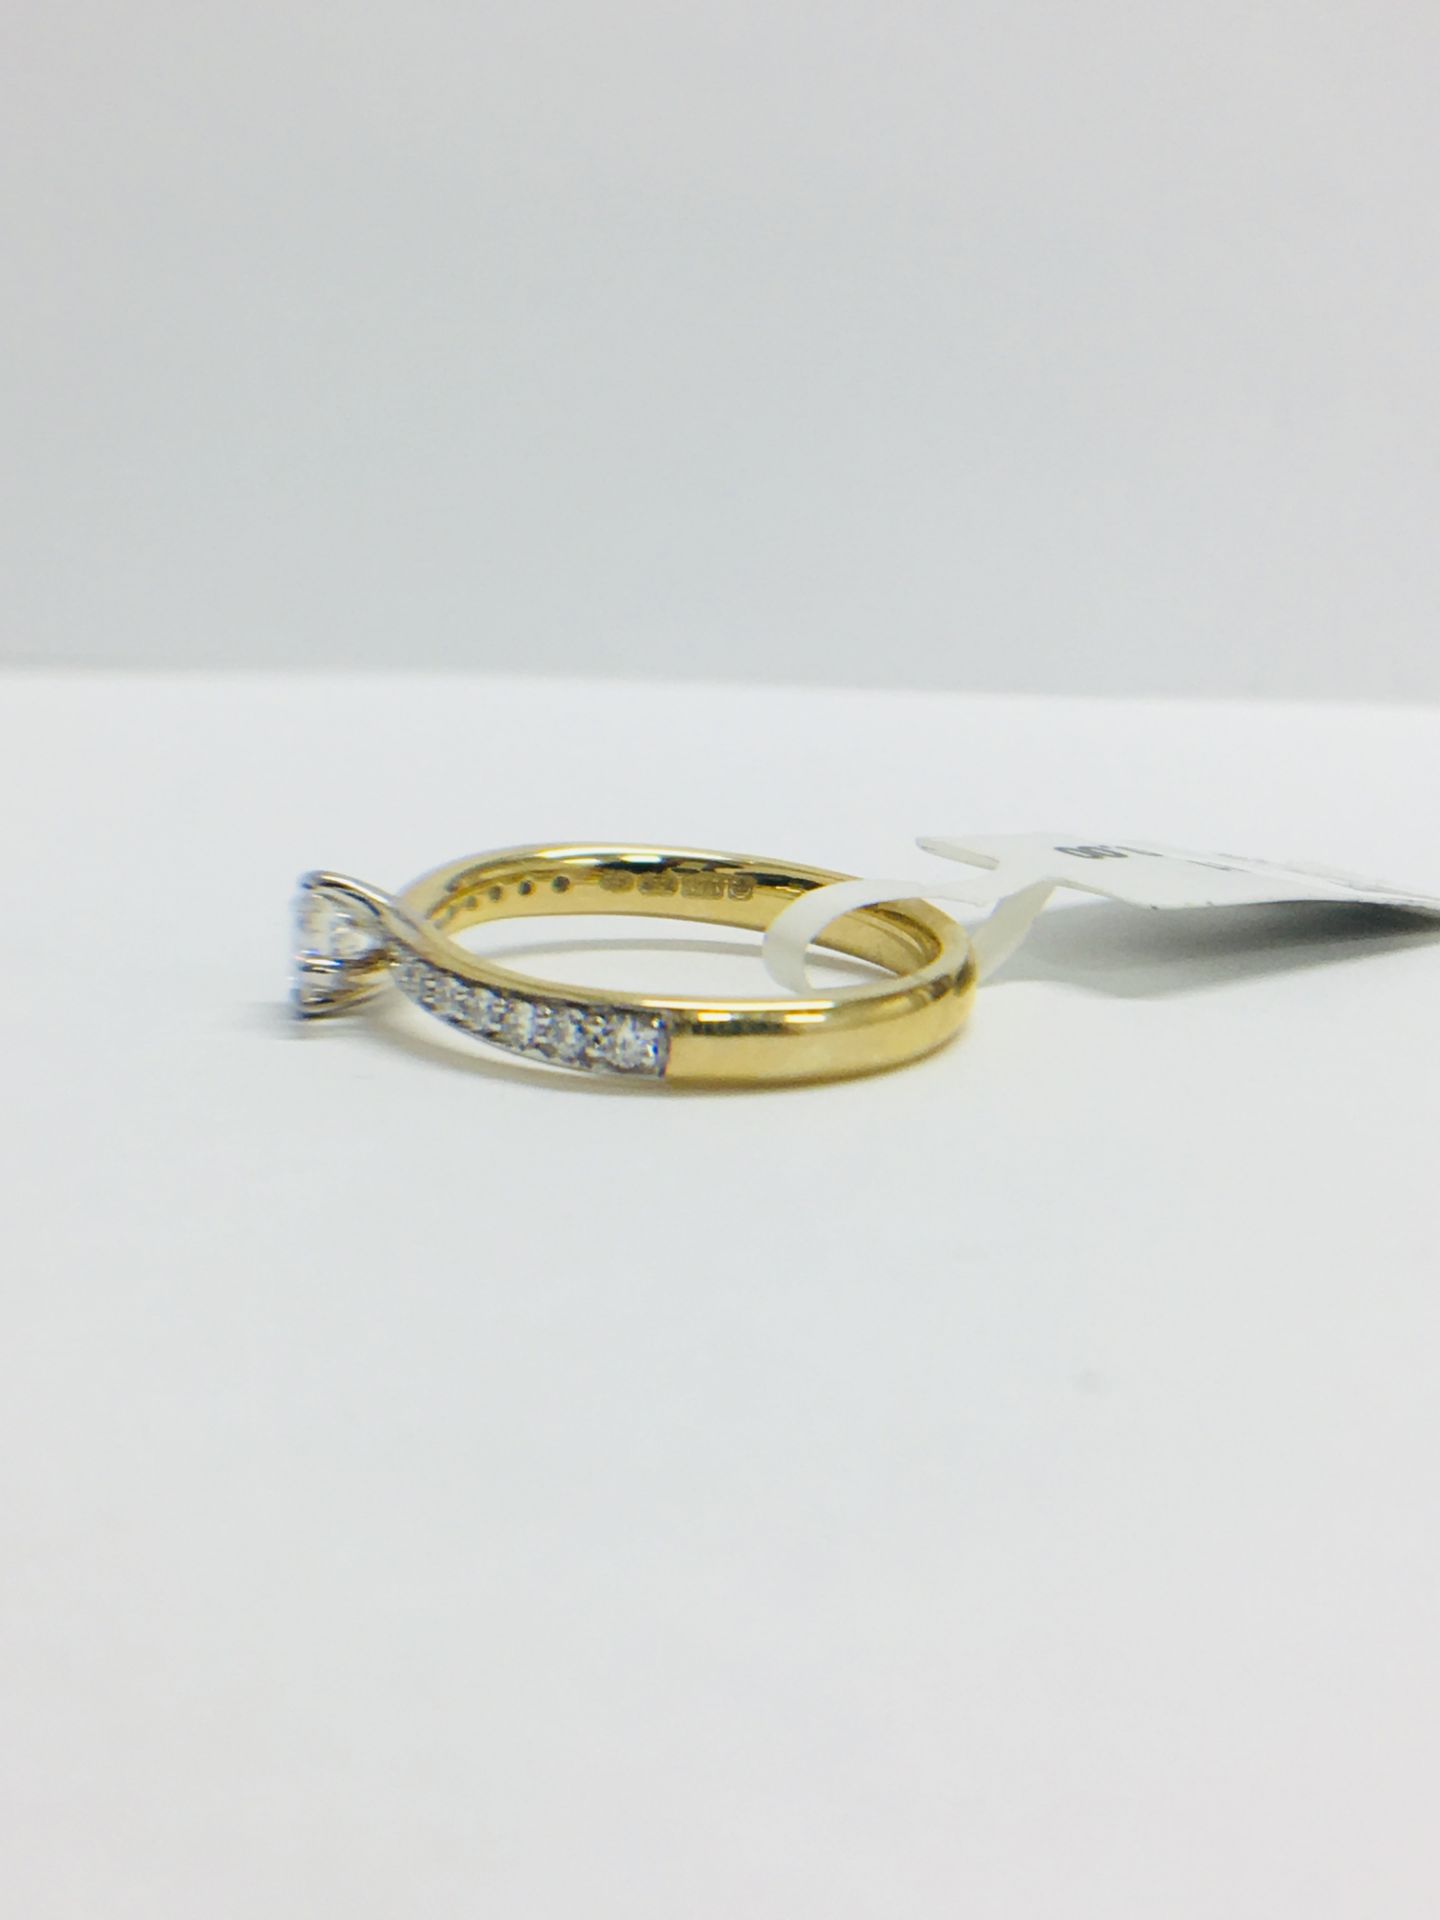 9ct Yellow Gold diamond Solitaire twist style ring - Image 3 of 11